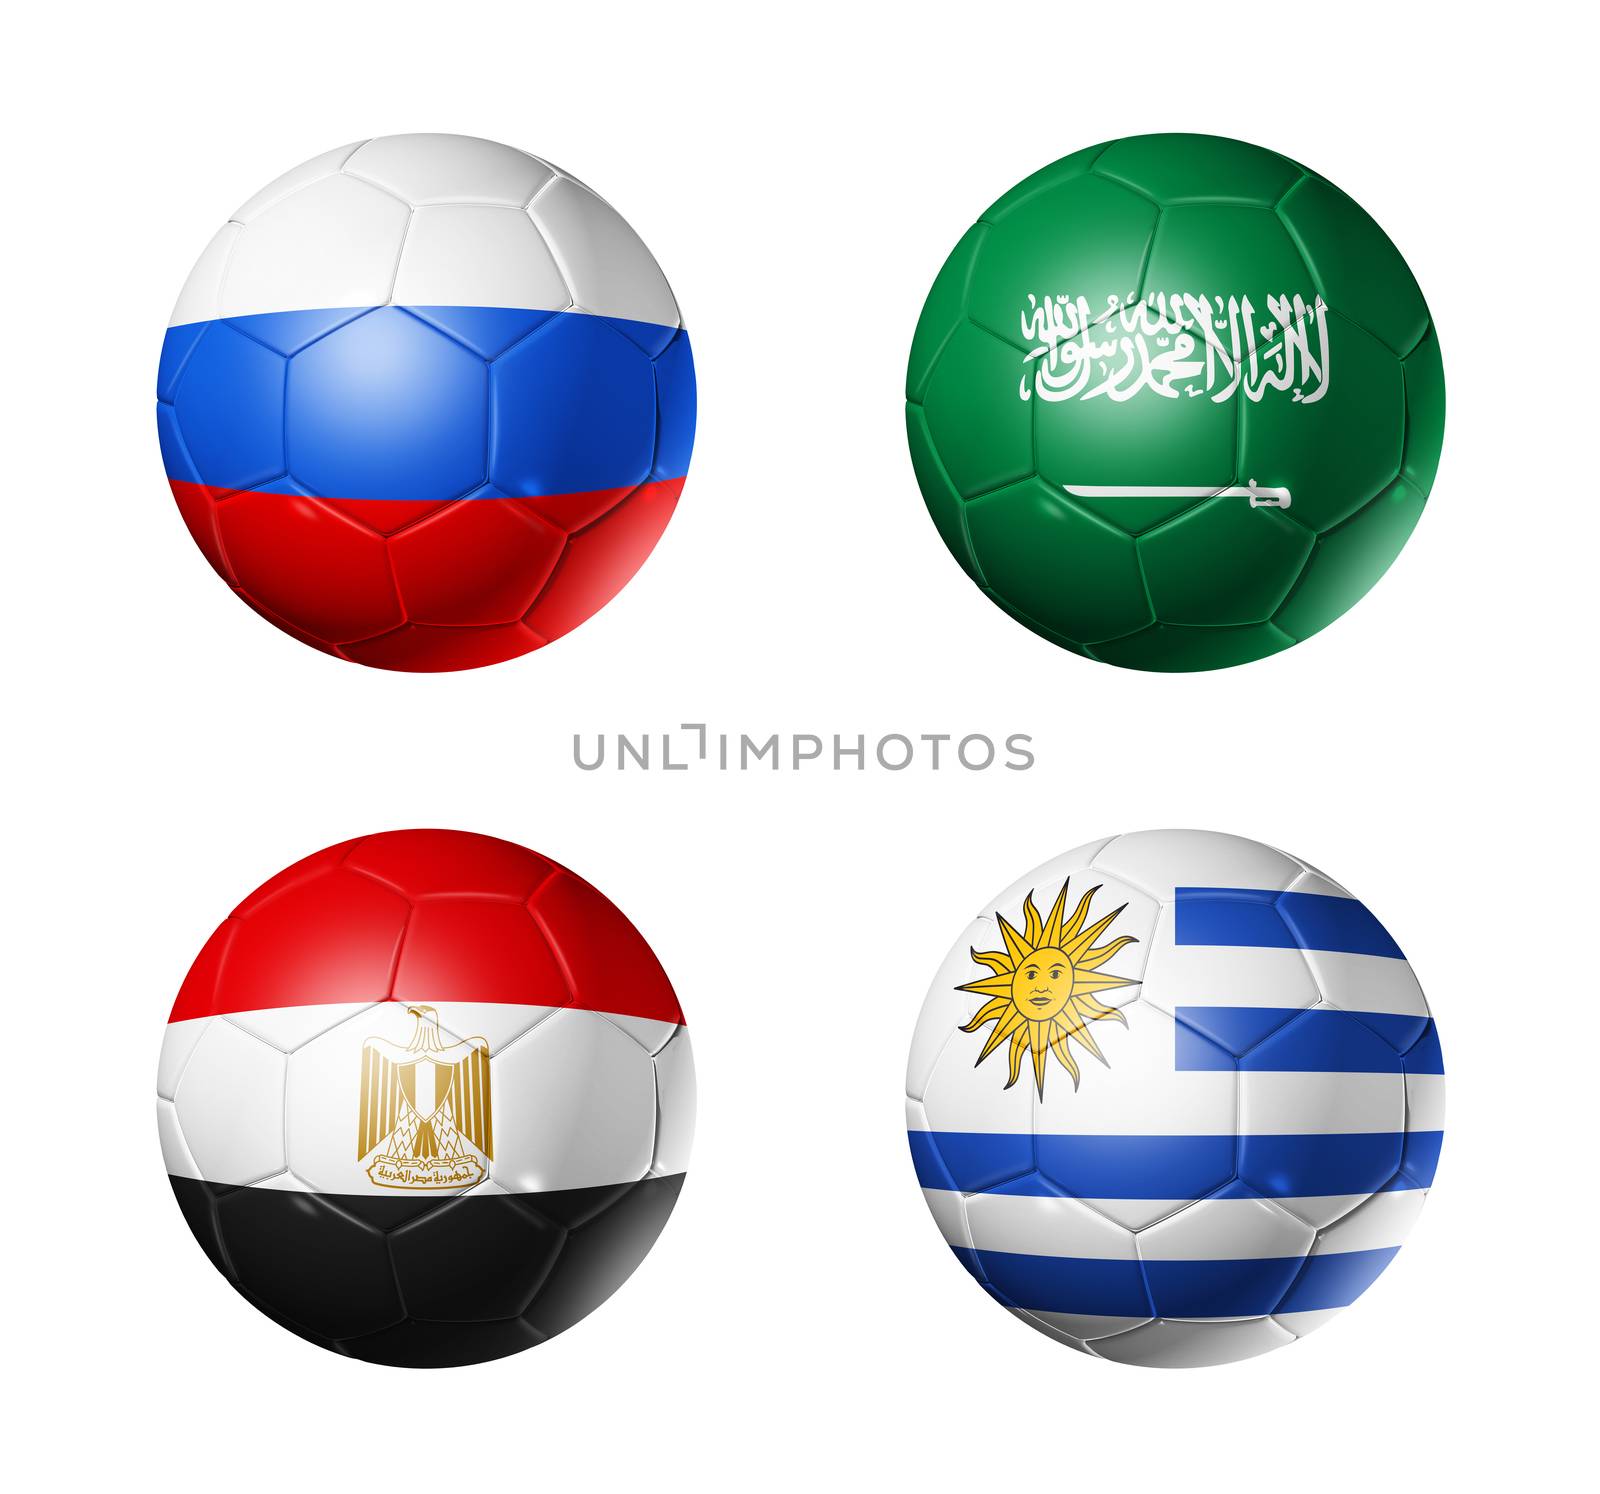 Russia football 2018 group A flags on soccer balls by daboost